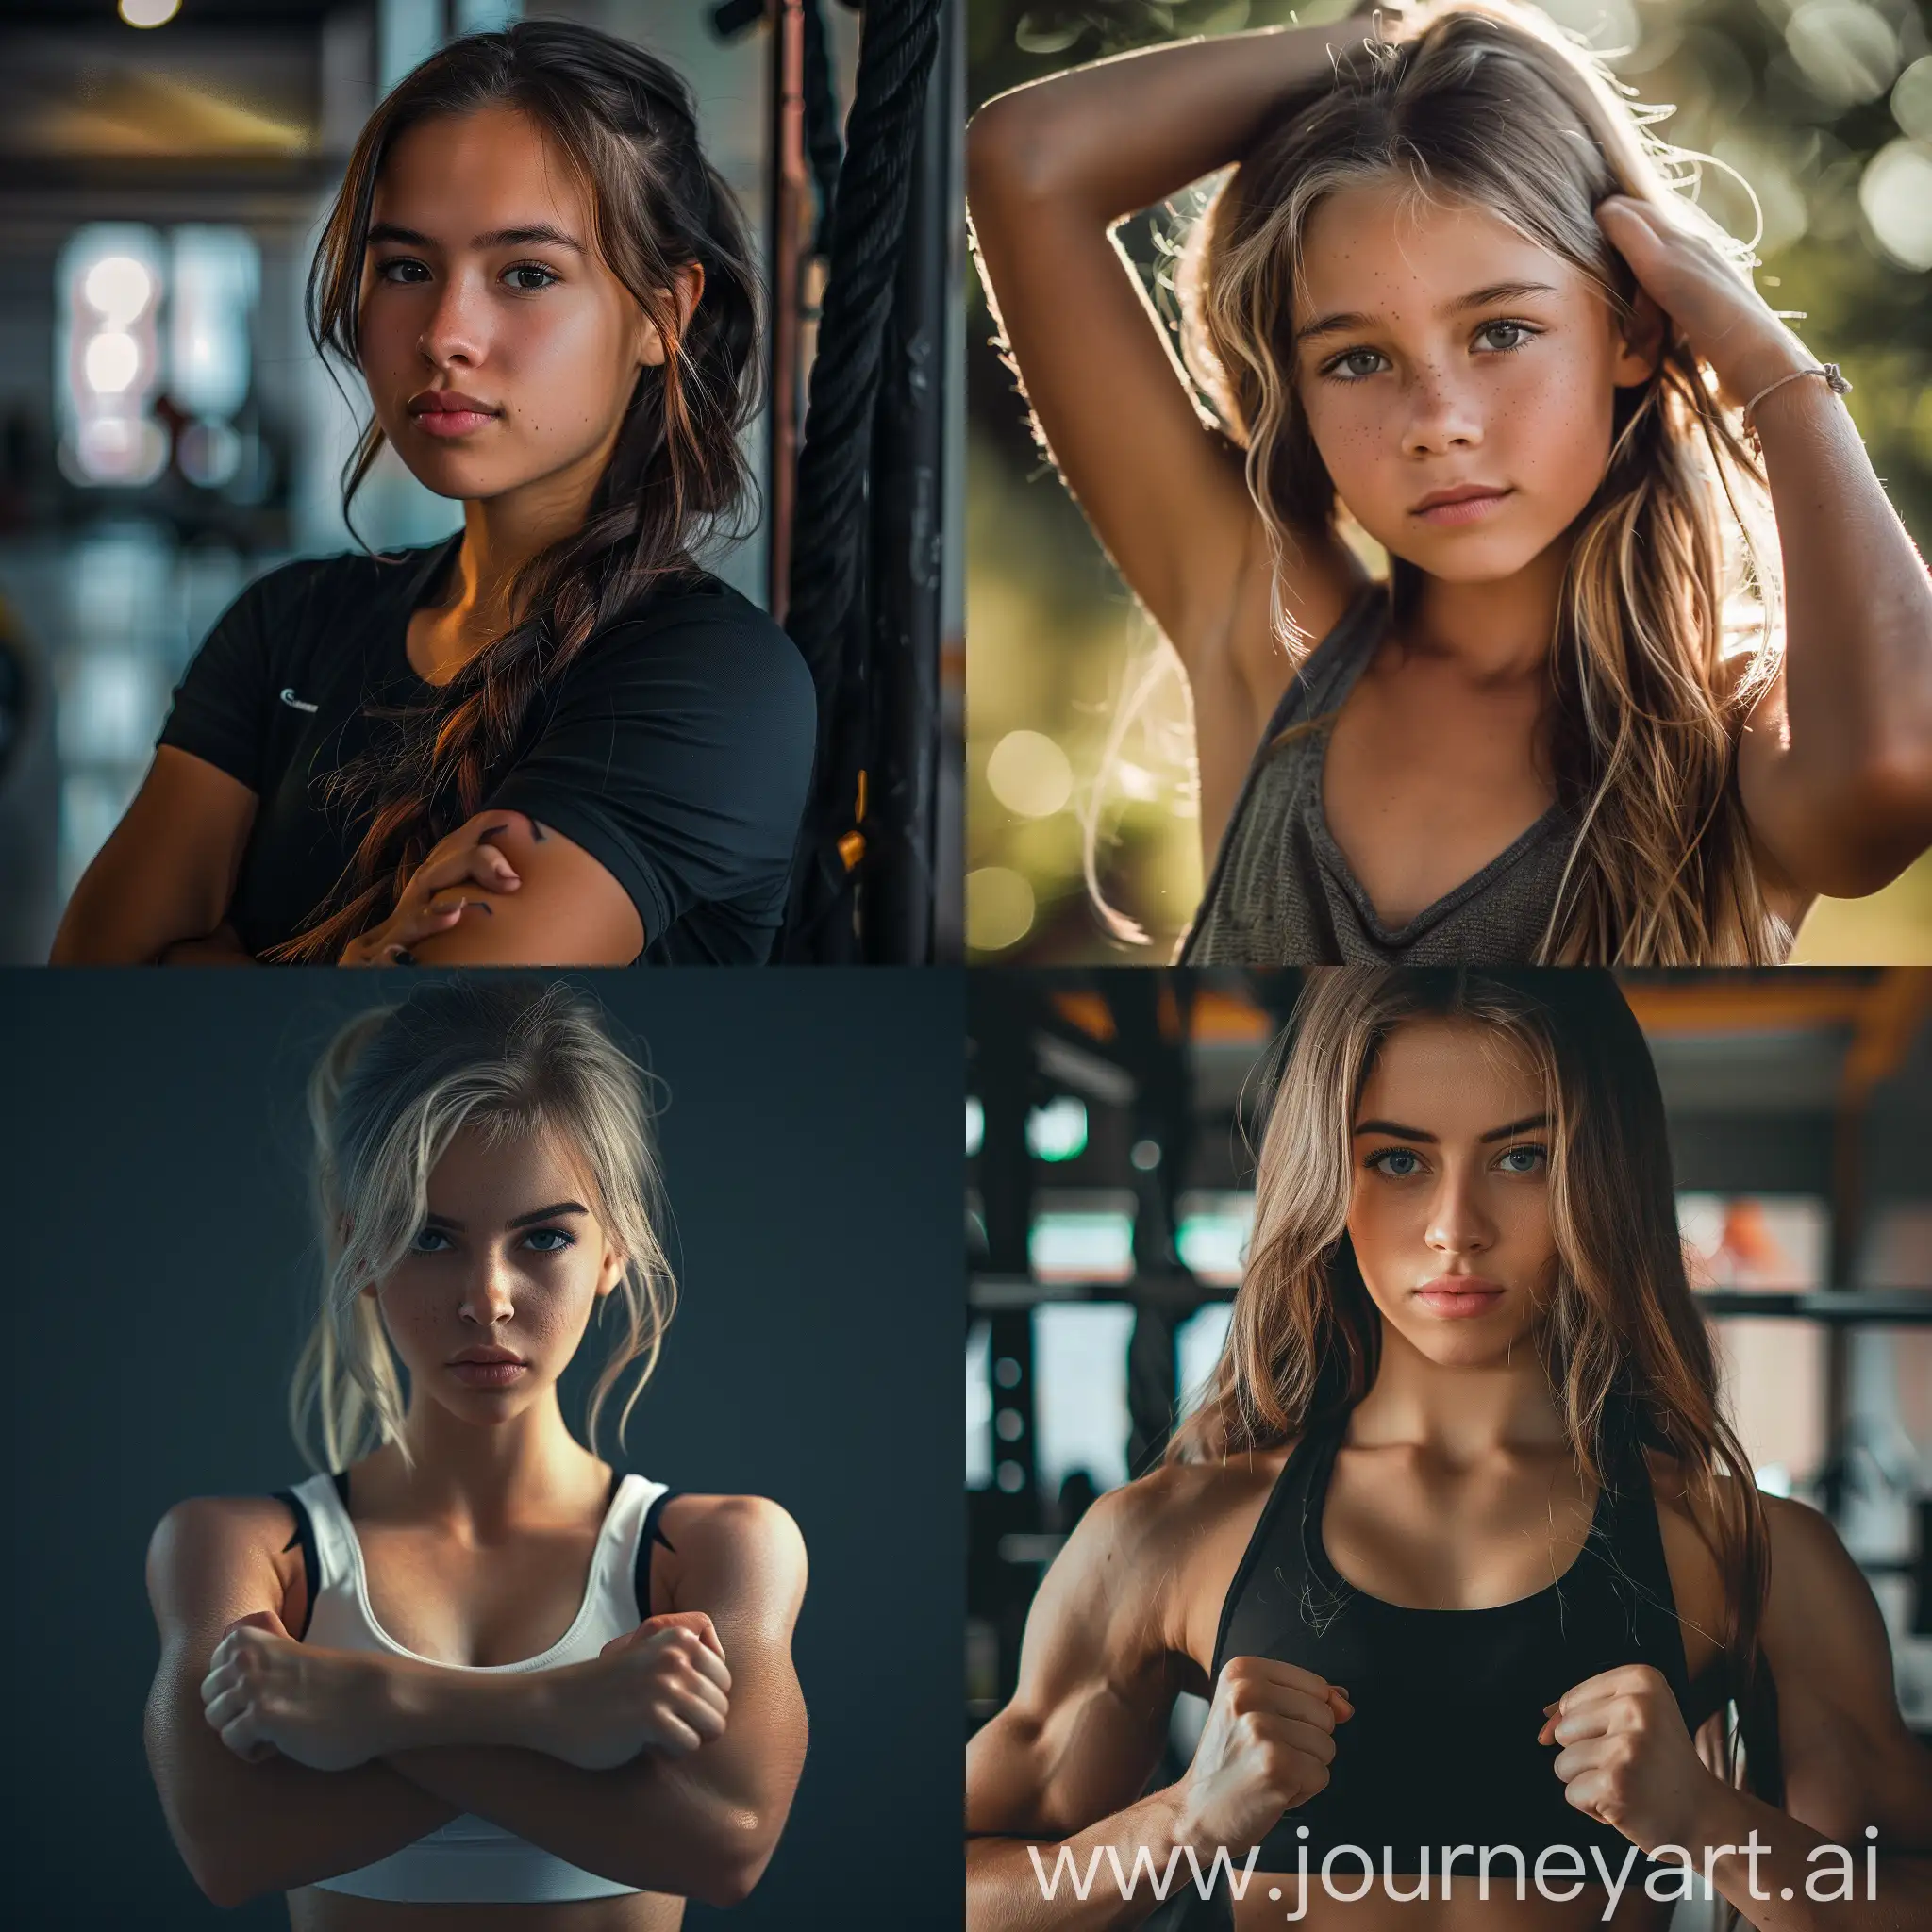 Empowered-Youth-in-Vibrant-4K-Portraits